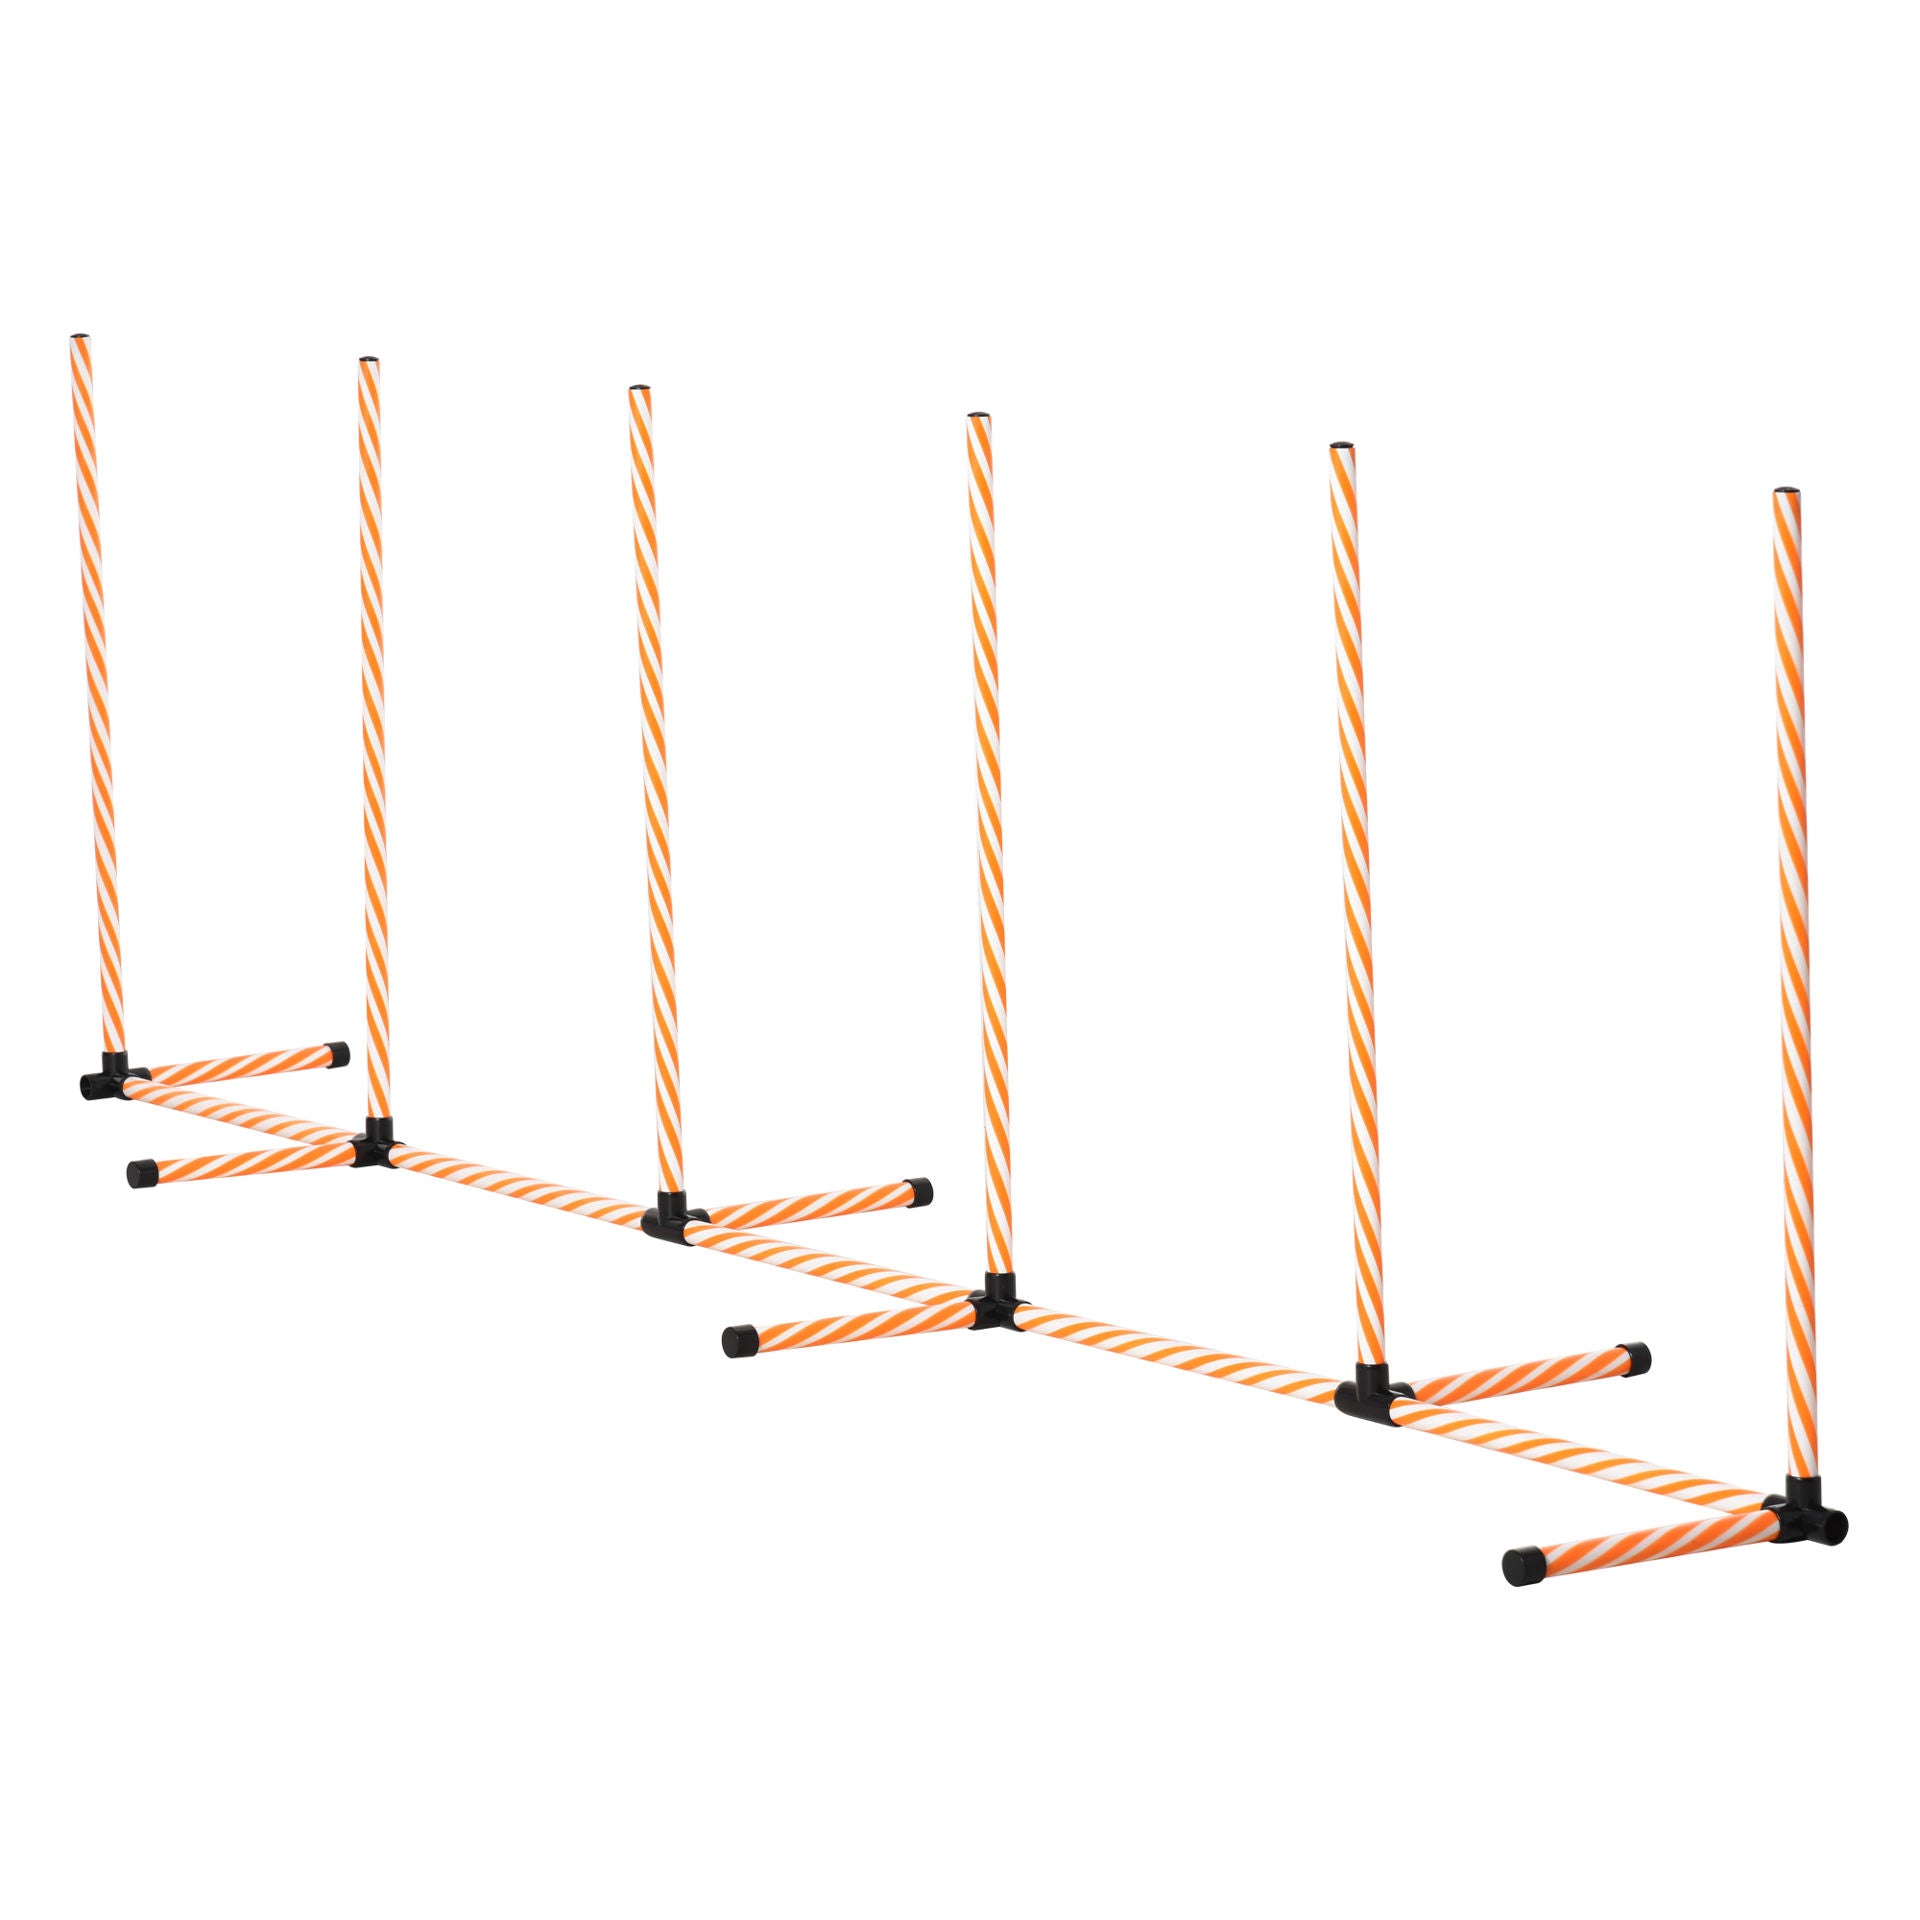 Nancy's Ax Creek Agility Set, 5-piece, with jumping hoop, tunnel, jumping obstacle, slalom poles, ground frame, carrying bag